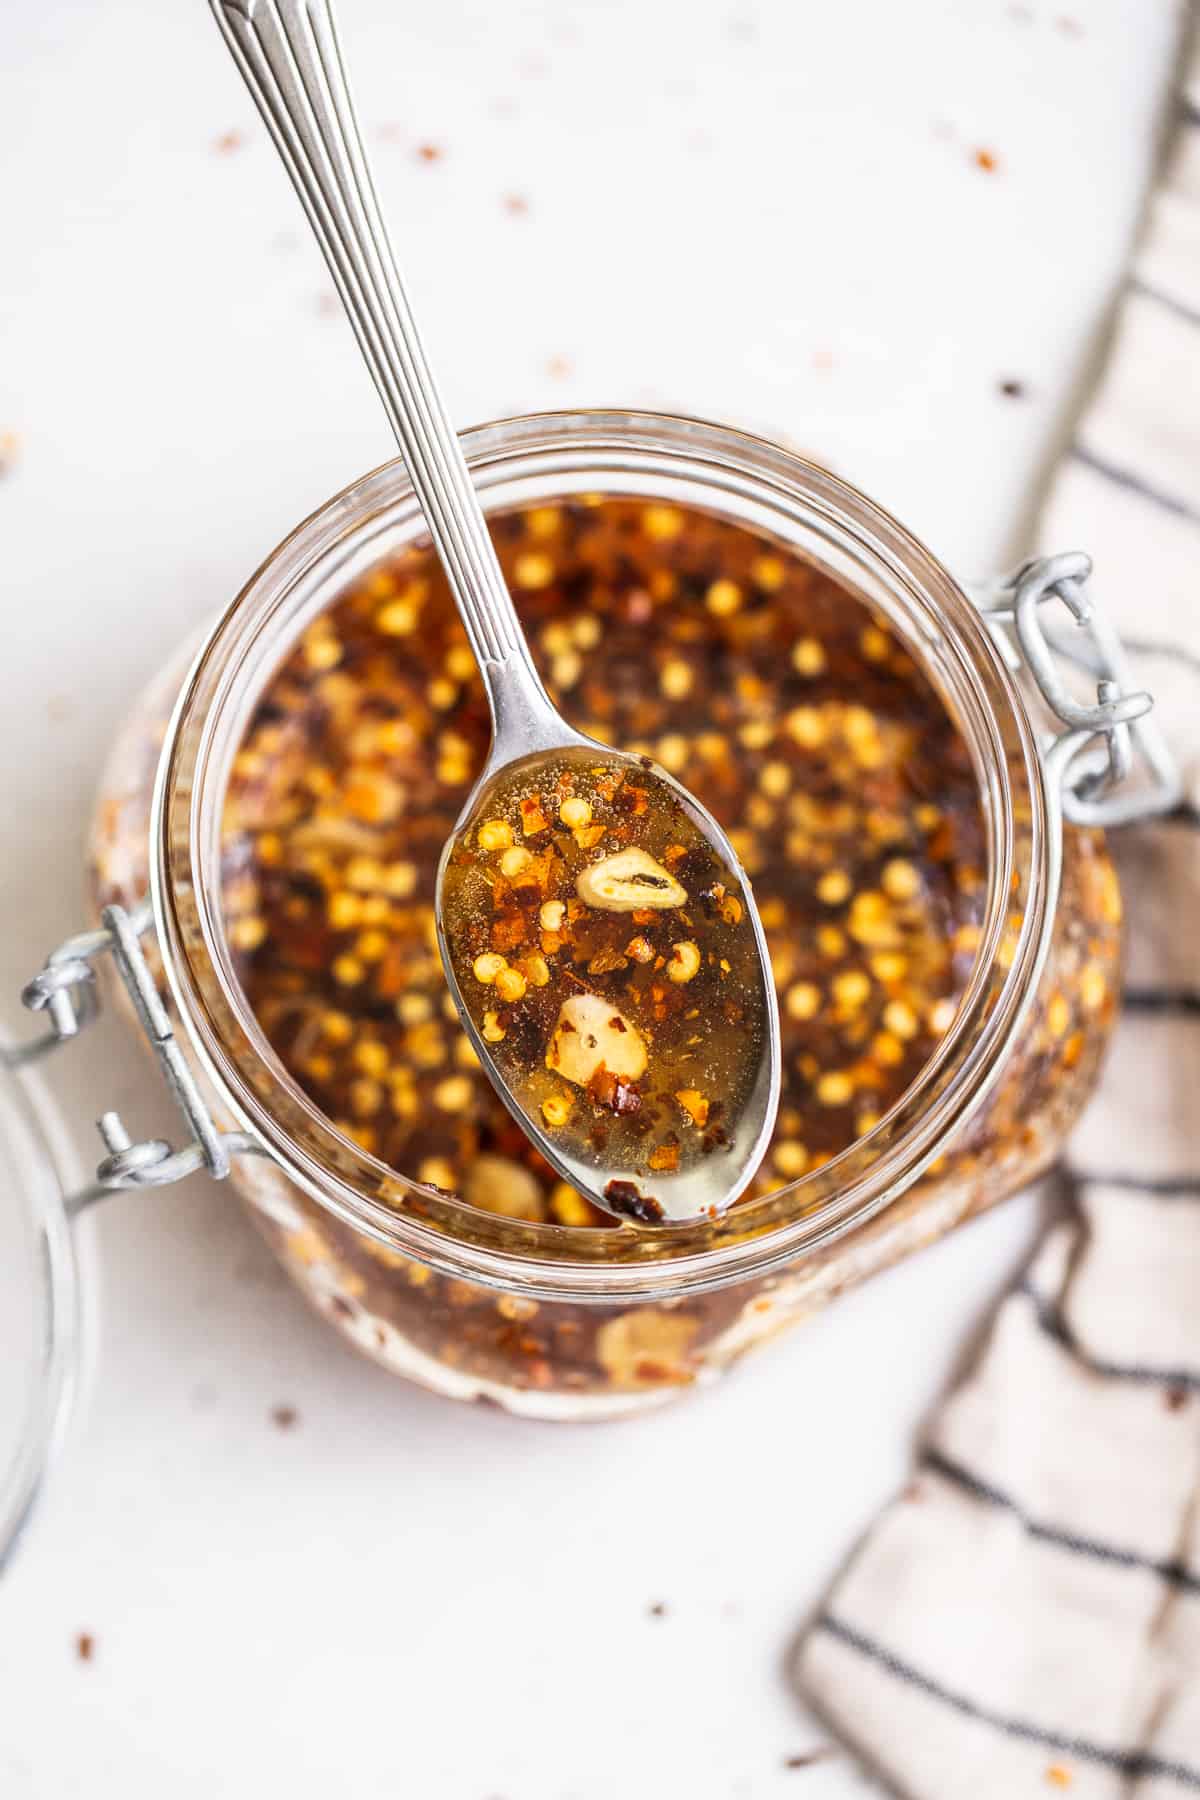 Hot honey on a spoon.